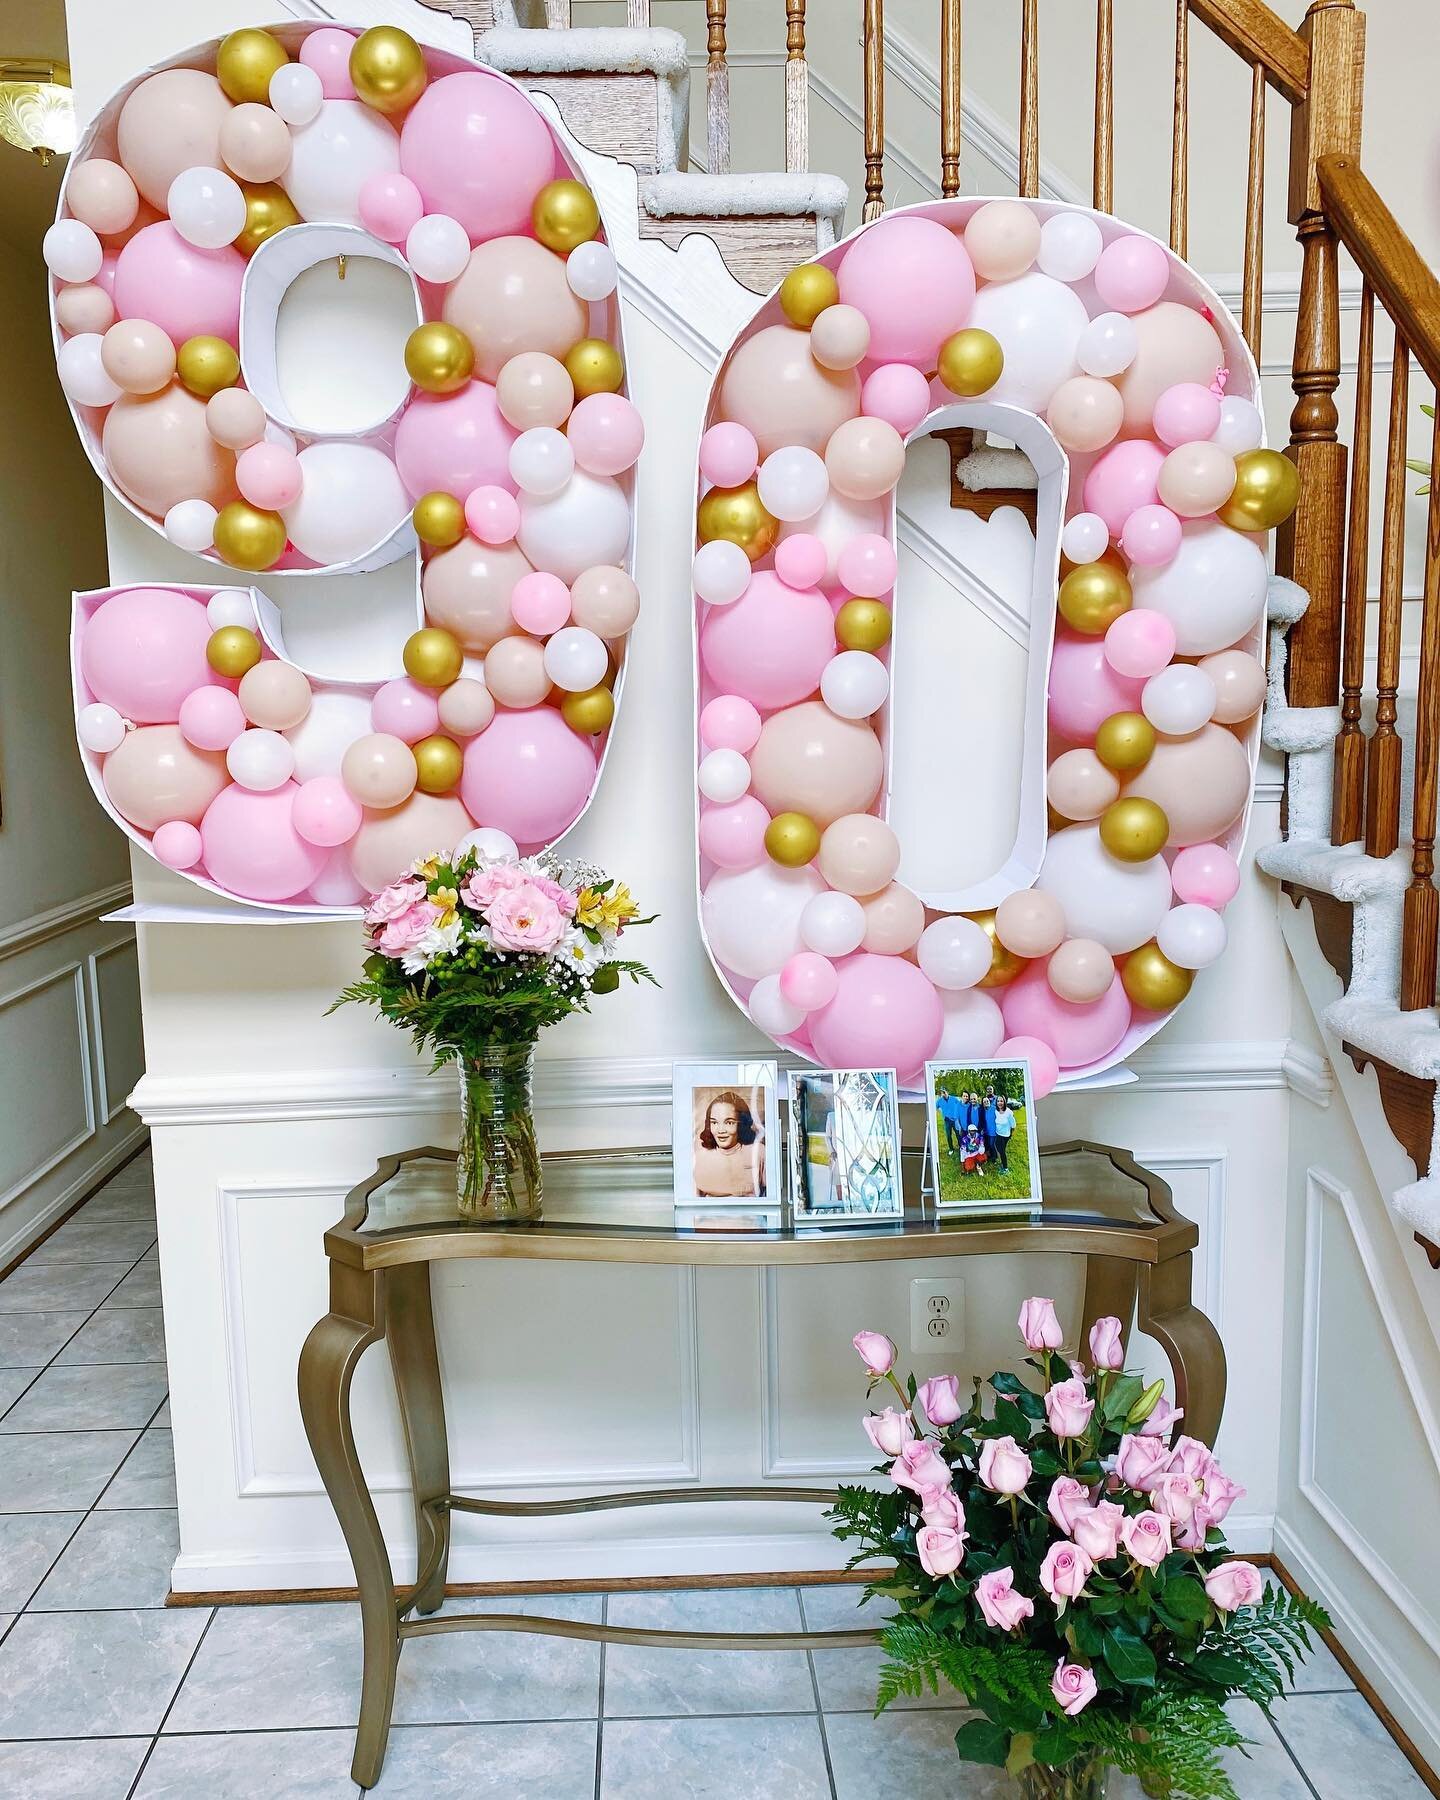 So grateful to celebrate my sweet grandmother&rsquo;s 90th birthday 👑🥳💗

#90thbirthday #partyinspo #balloongarland #partydecor #dmveventstylist
#ballooninstallation #mosaicballoons #mosaicnumbers #balloondecor #dmvballoons #dcballoons #balloongarl